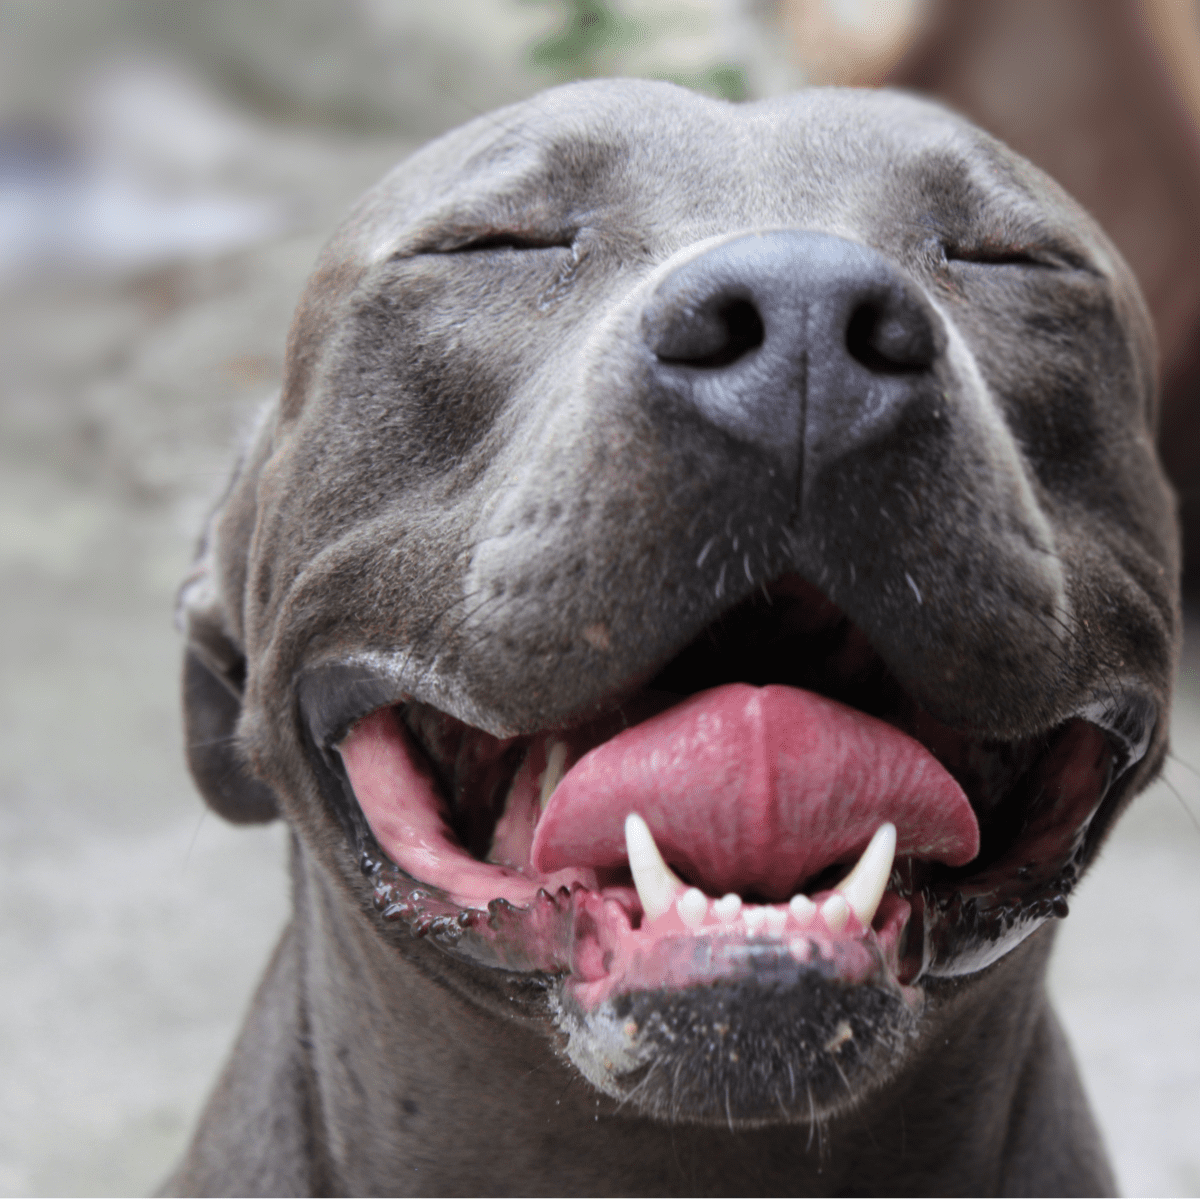 Are Pit Bulls Naturally Aggressive? - PetHelpful